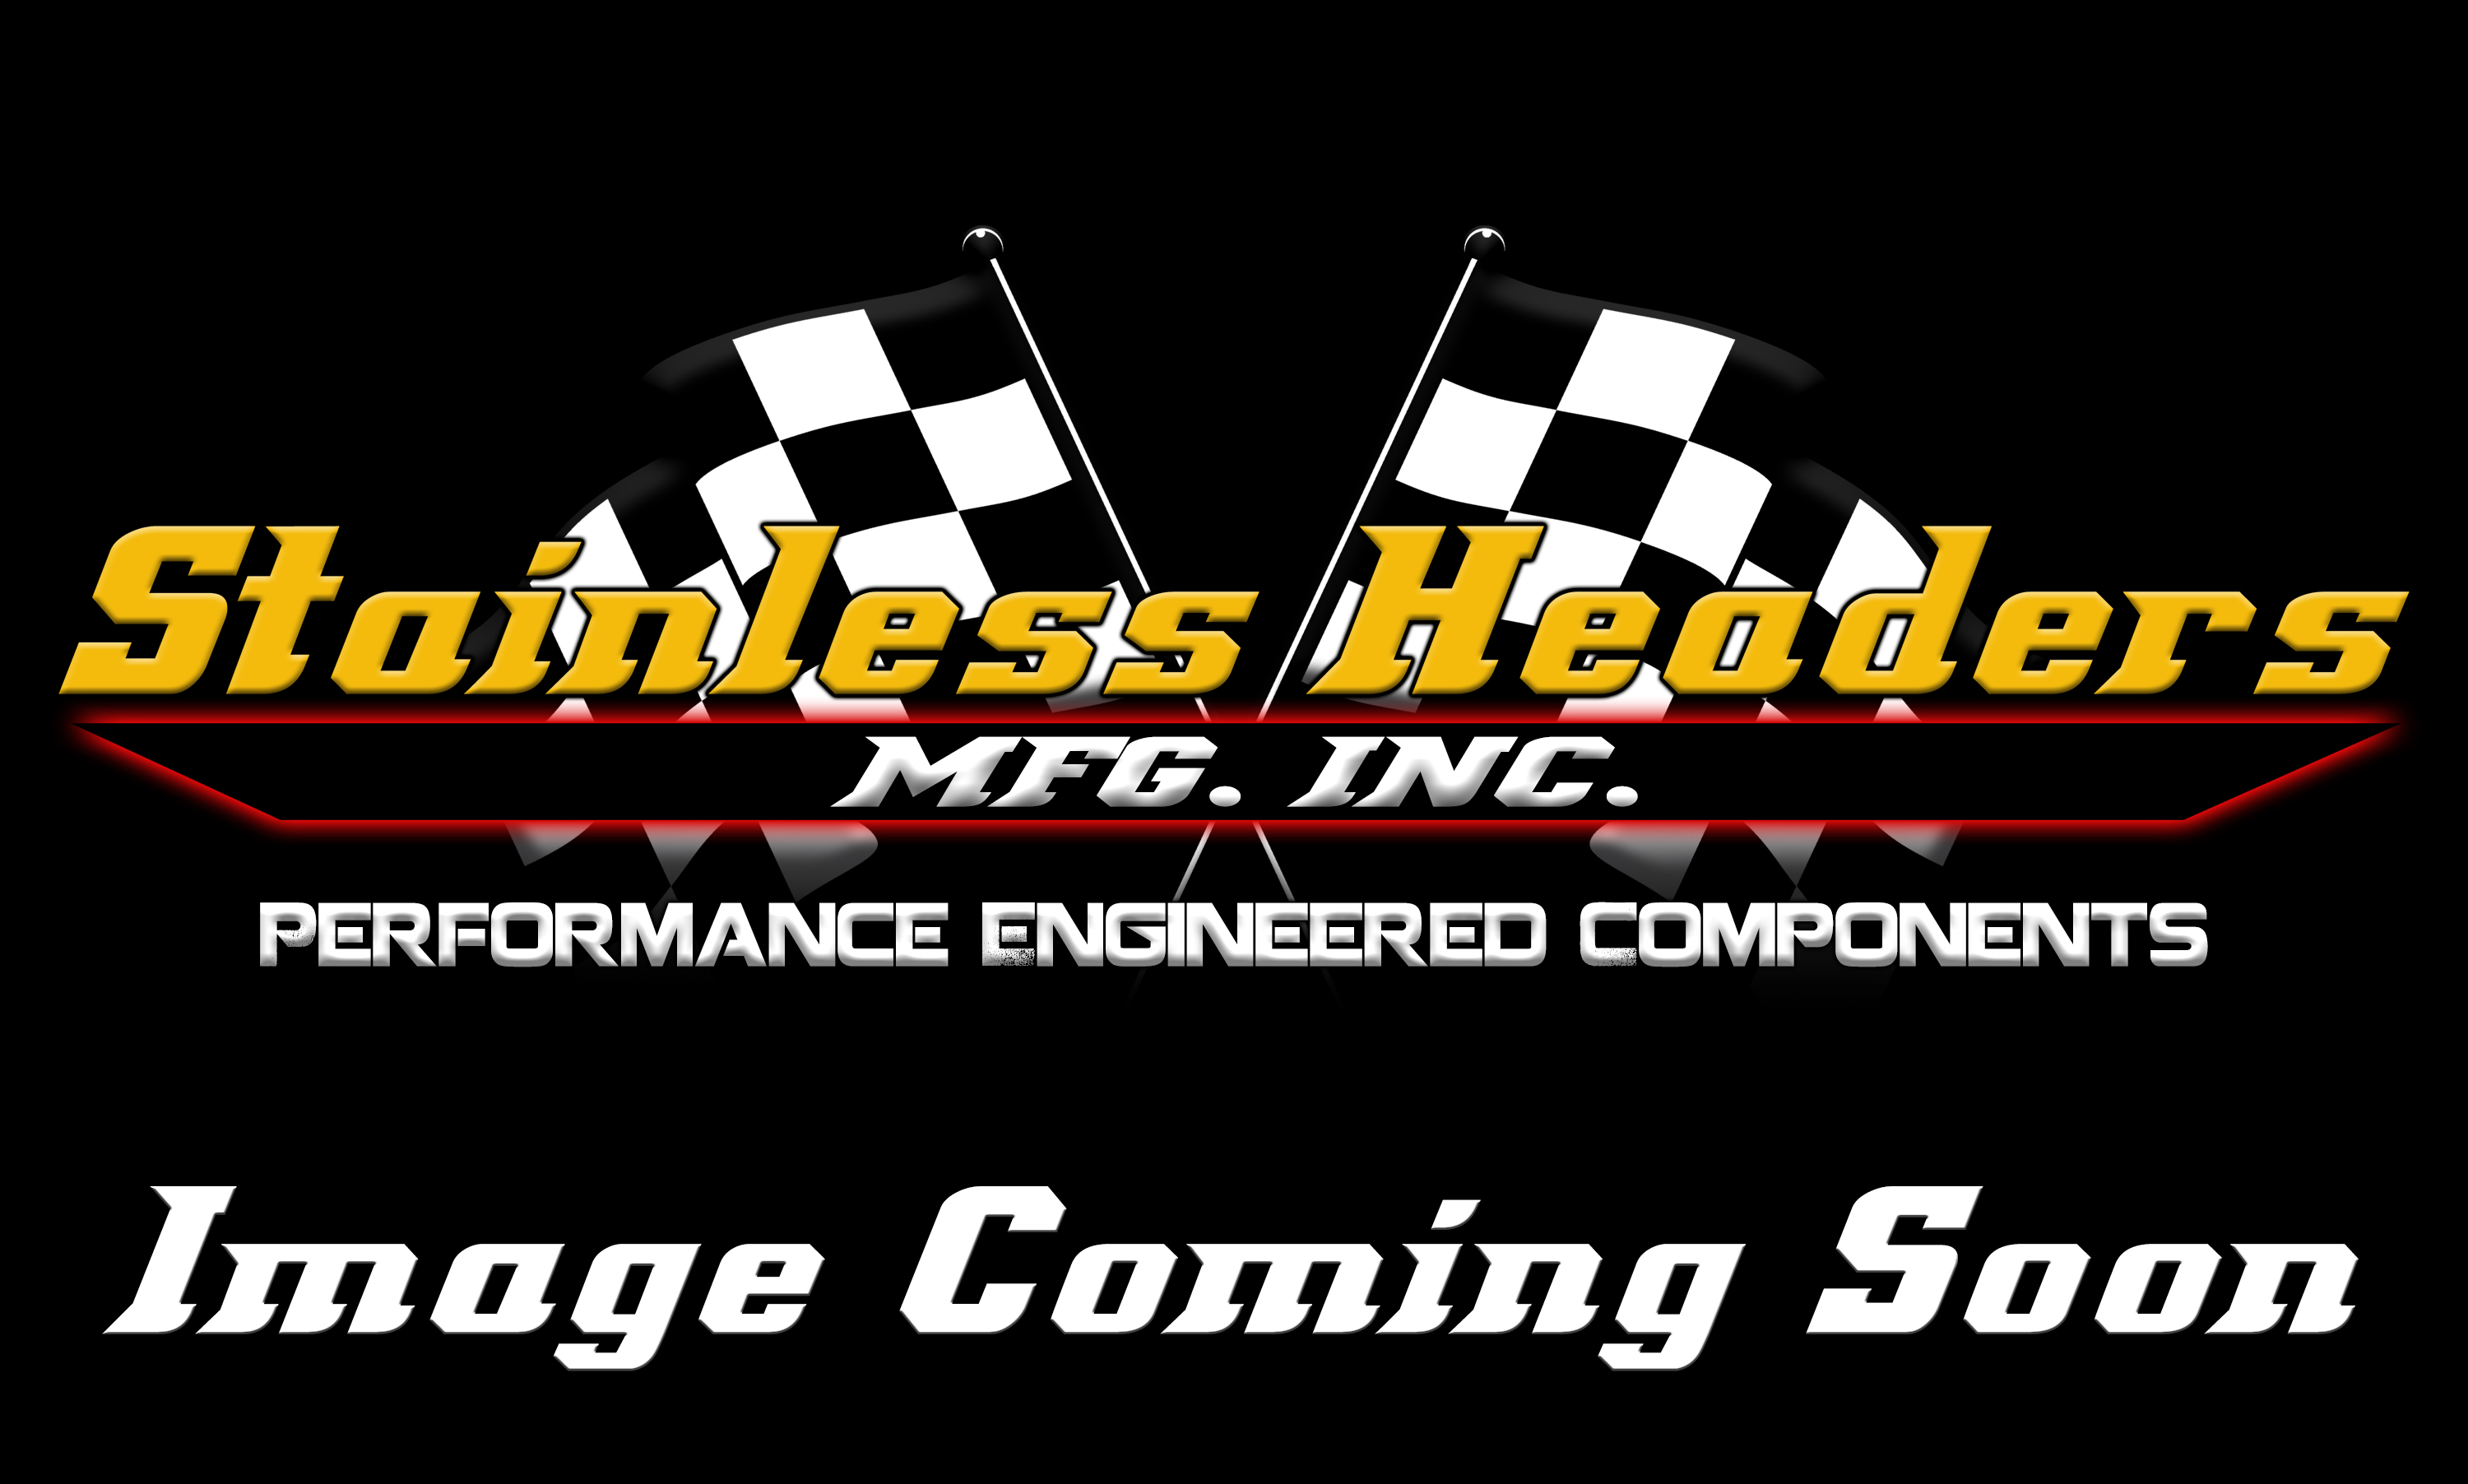 CompTurbo Technologies - CTR4518R-8388 Mid Frame Oil Lubricated 2.0 Turbocharger (1500 HP) - Image 3